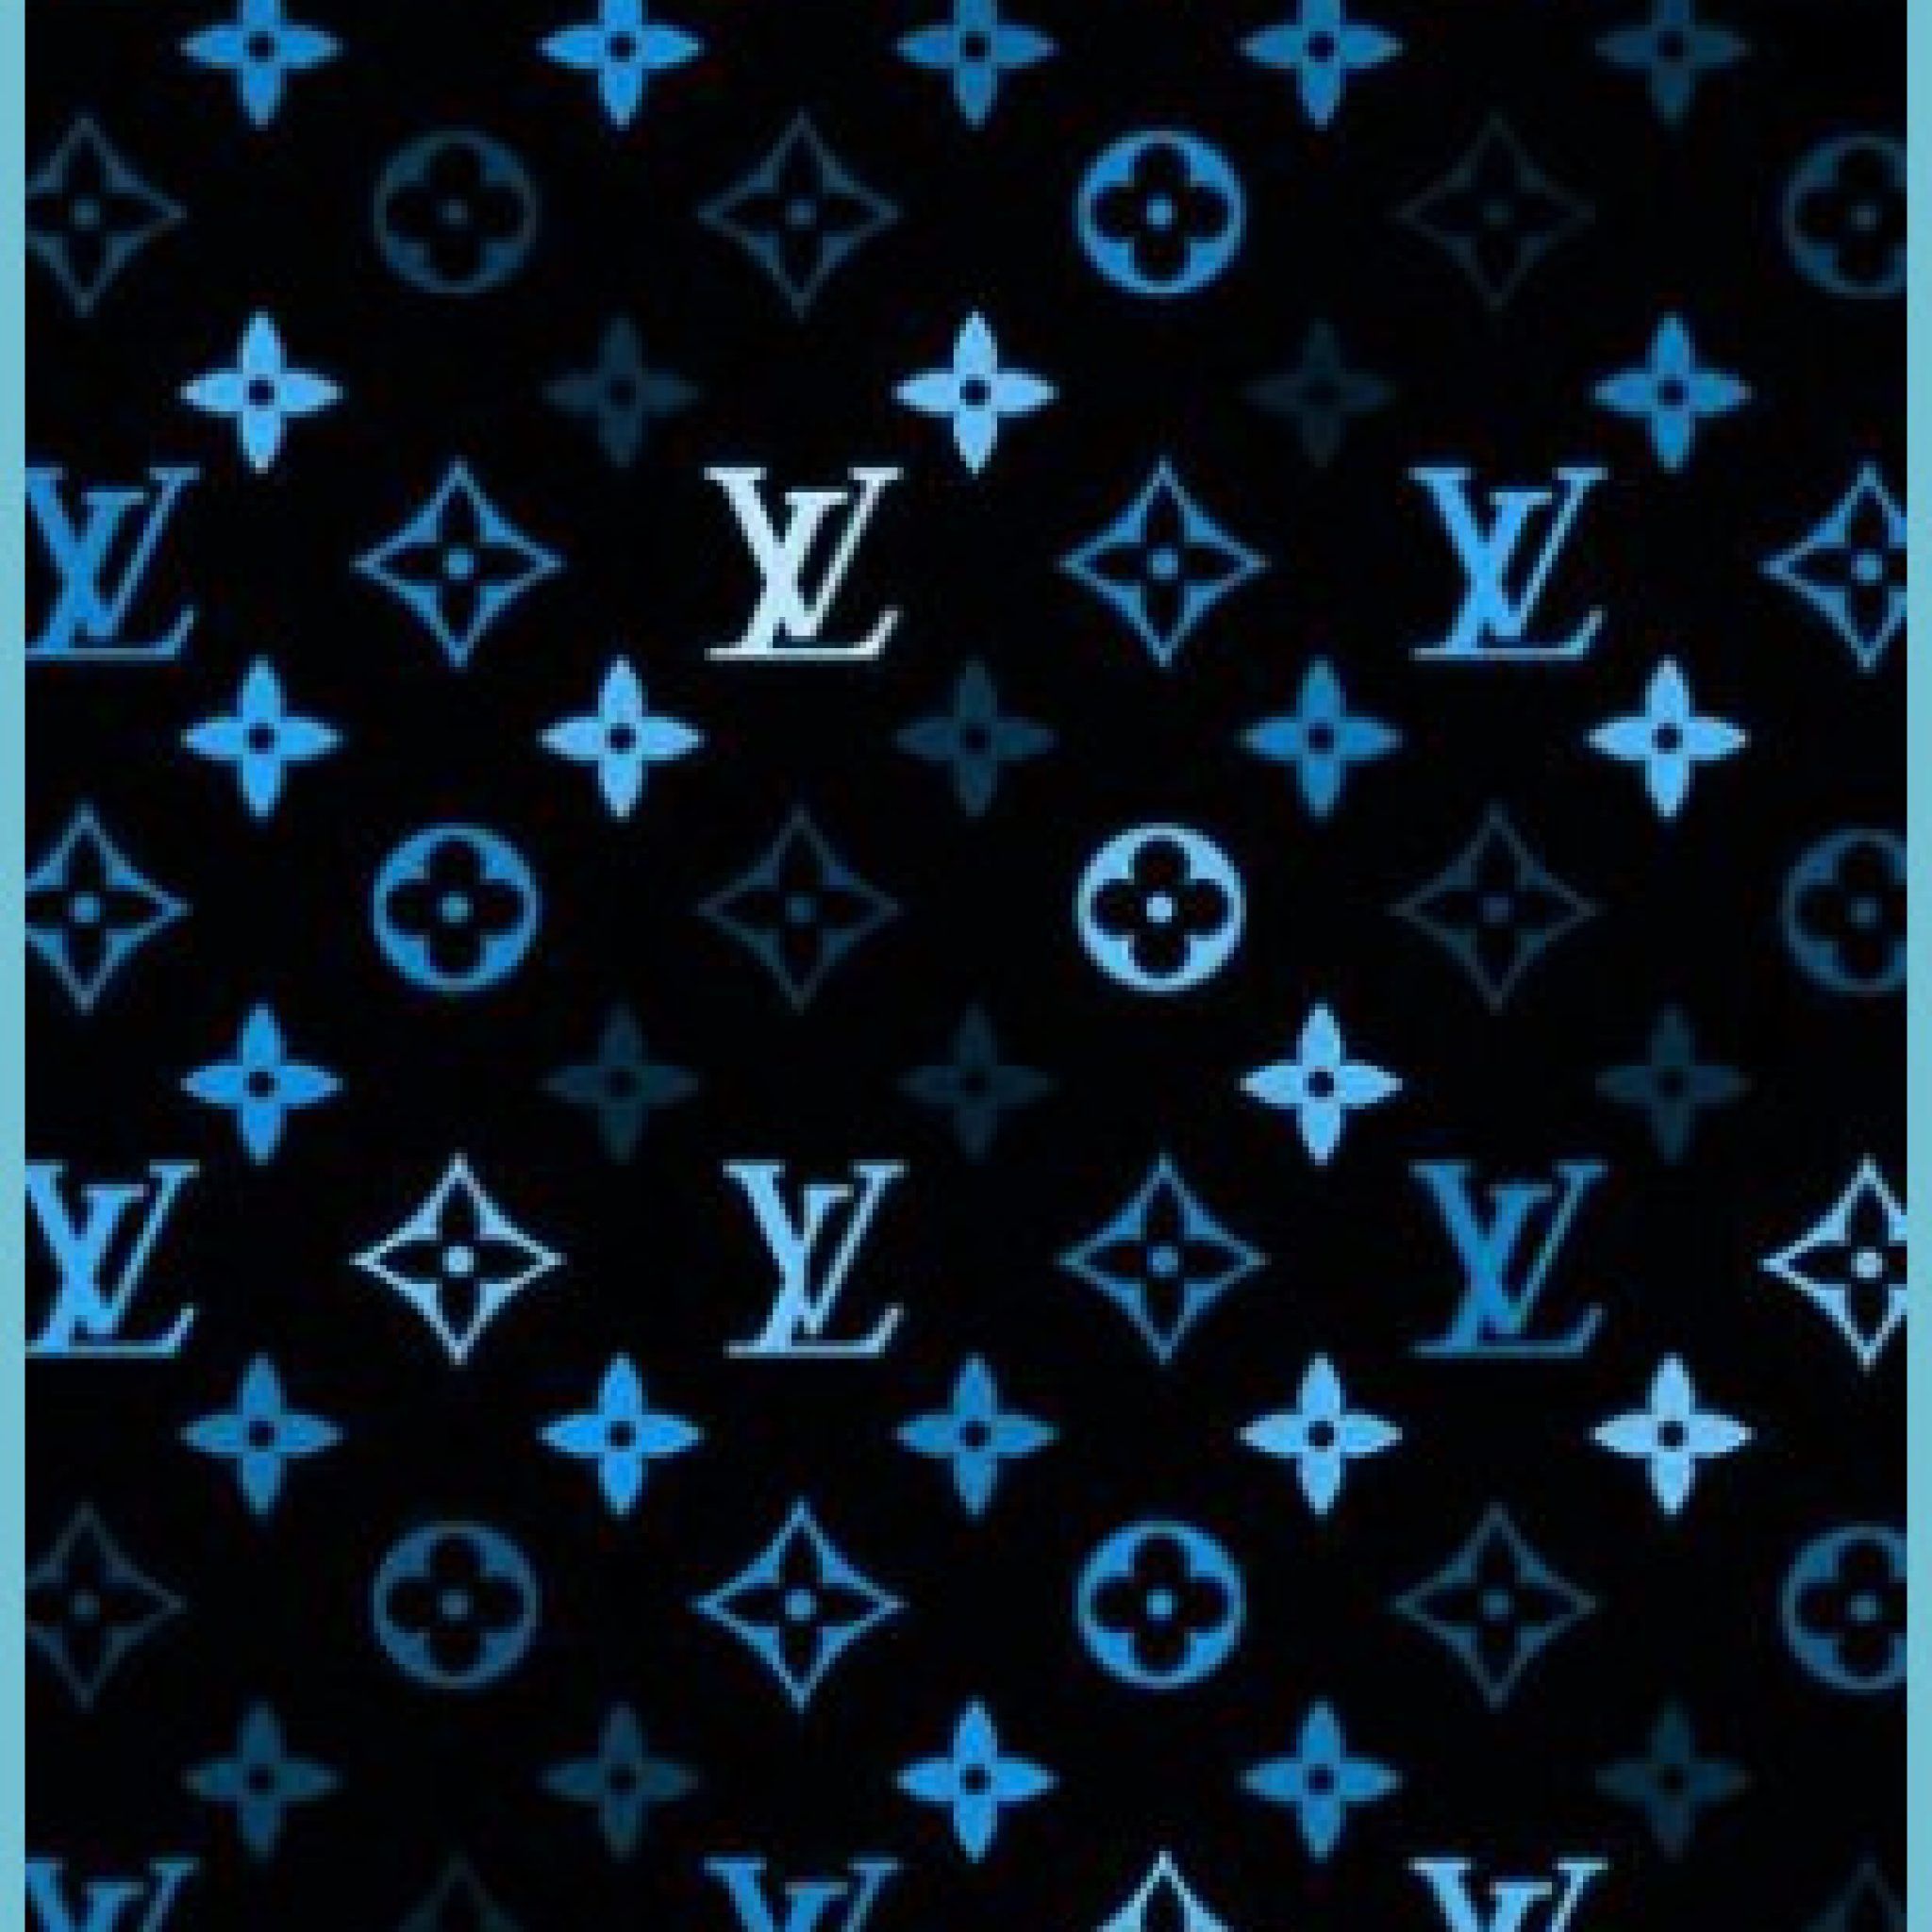 LV in blue Blue wallpaper iphone, Edgy wallpaper, Hypebeast vuitton phone background